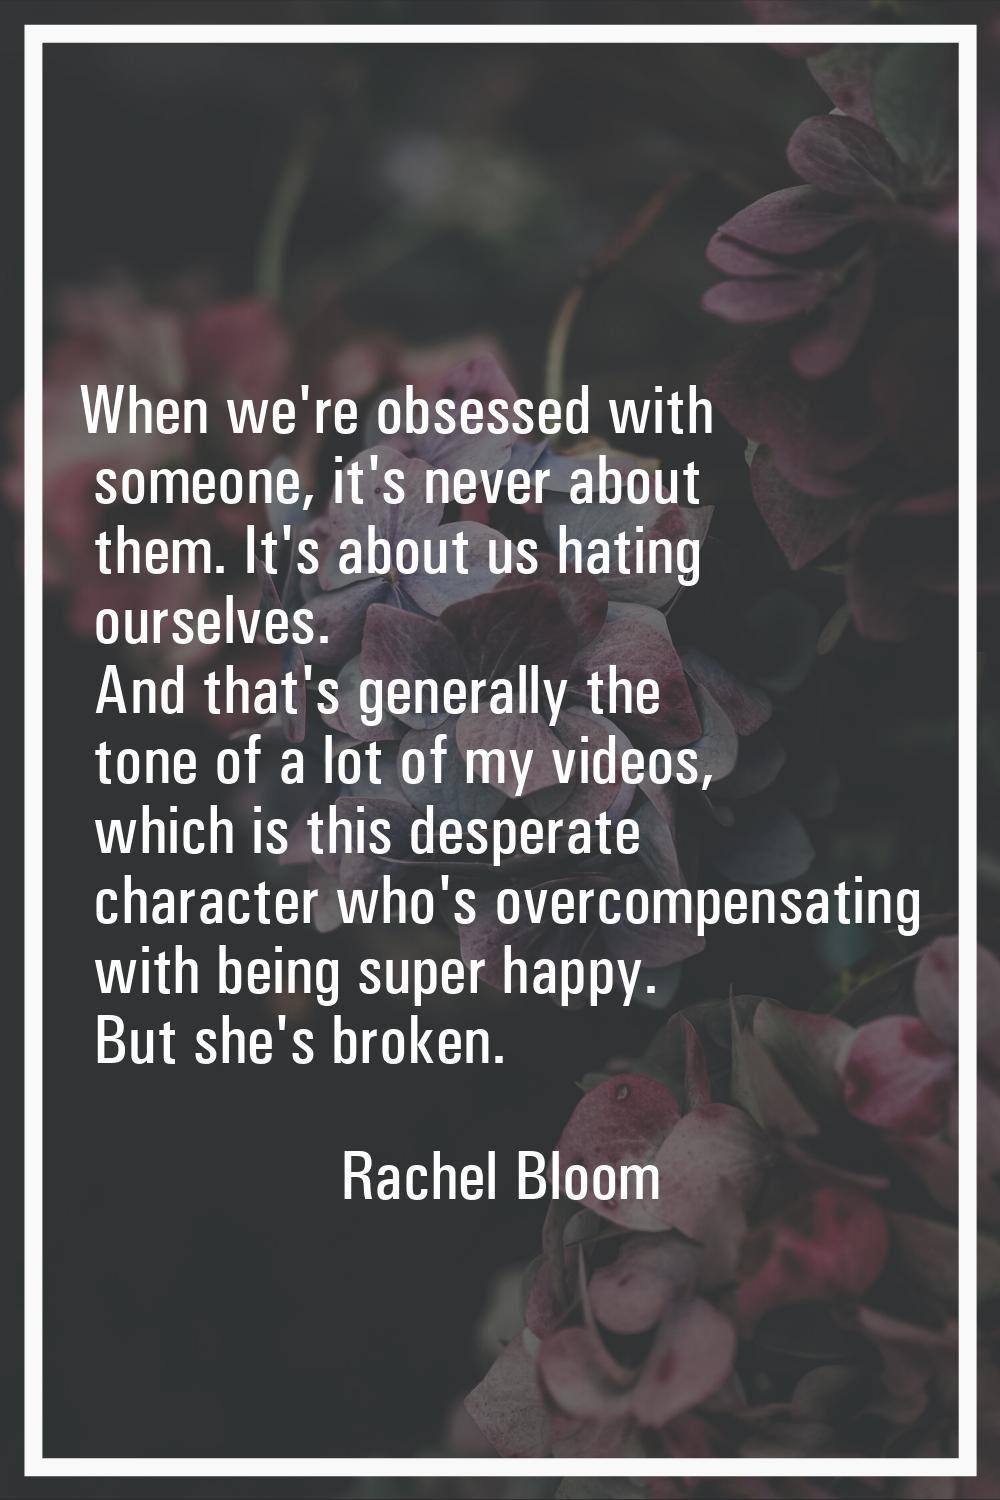 When we're obsessed with someone, it's never about them. It's about us hating ourselves. And that's